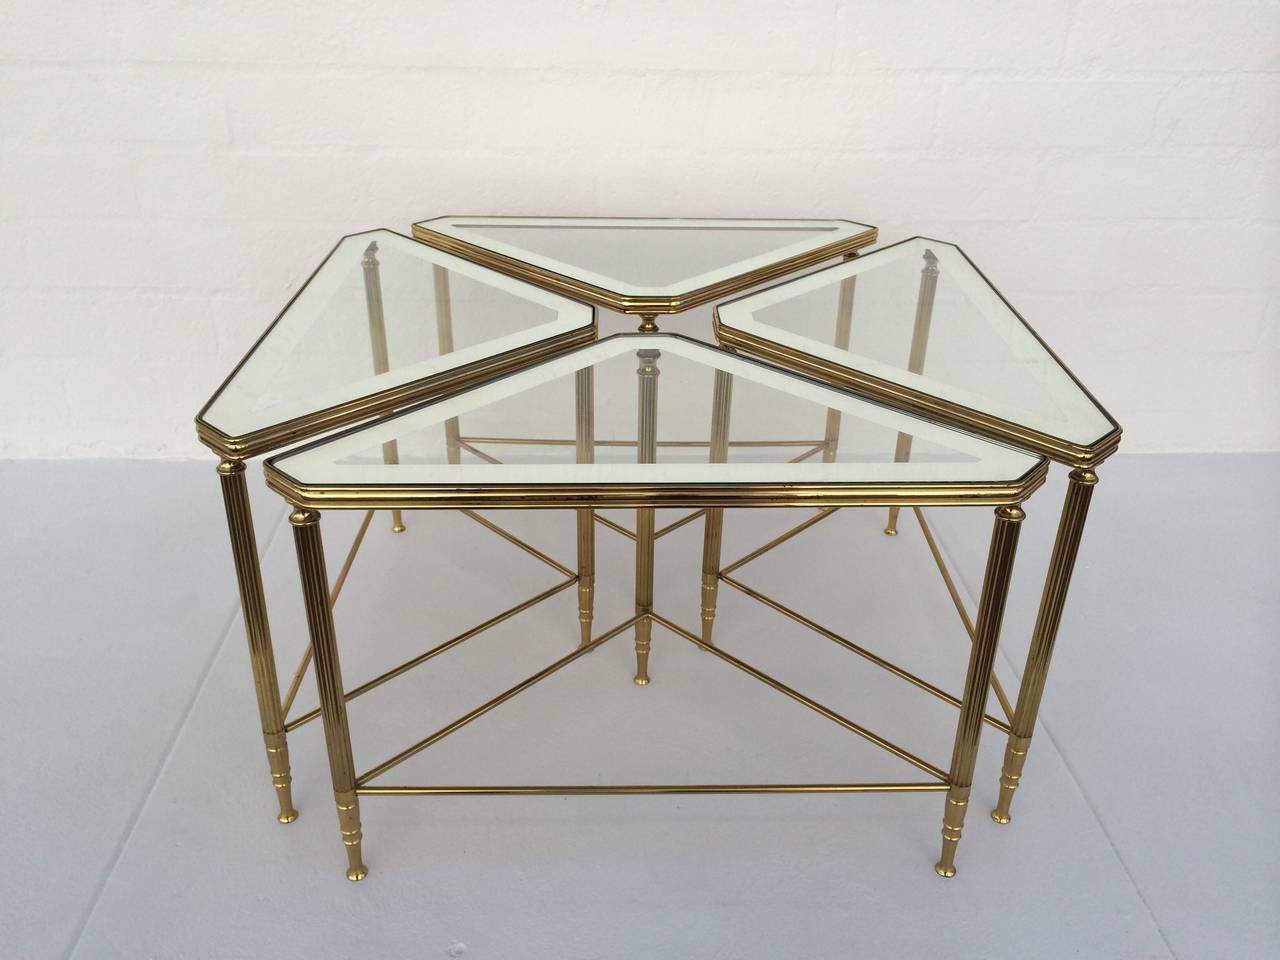 A set of four brass with glass inset tops that have a 2